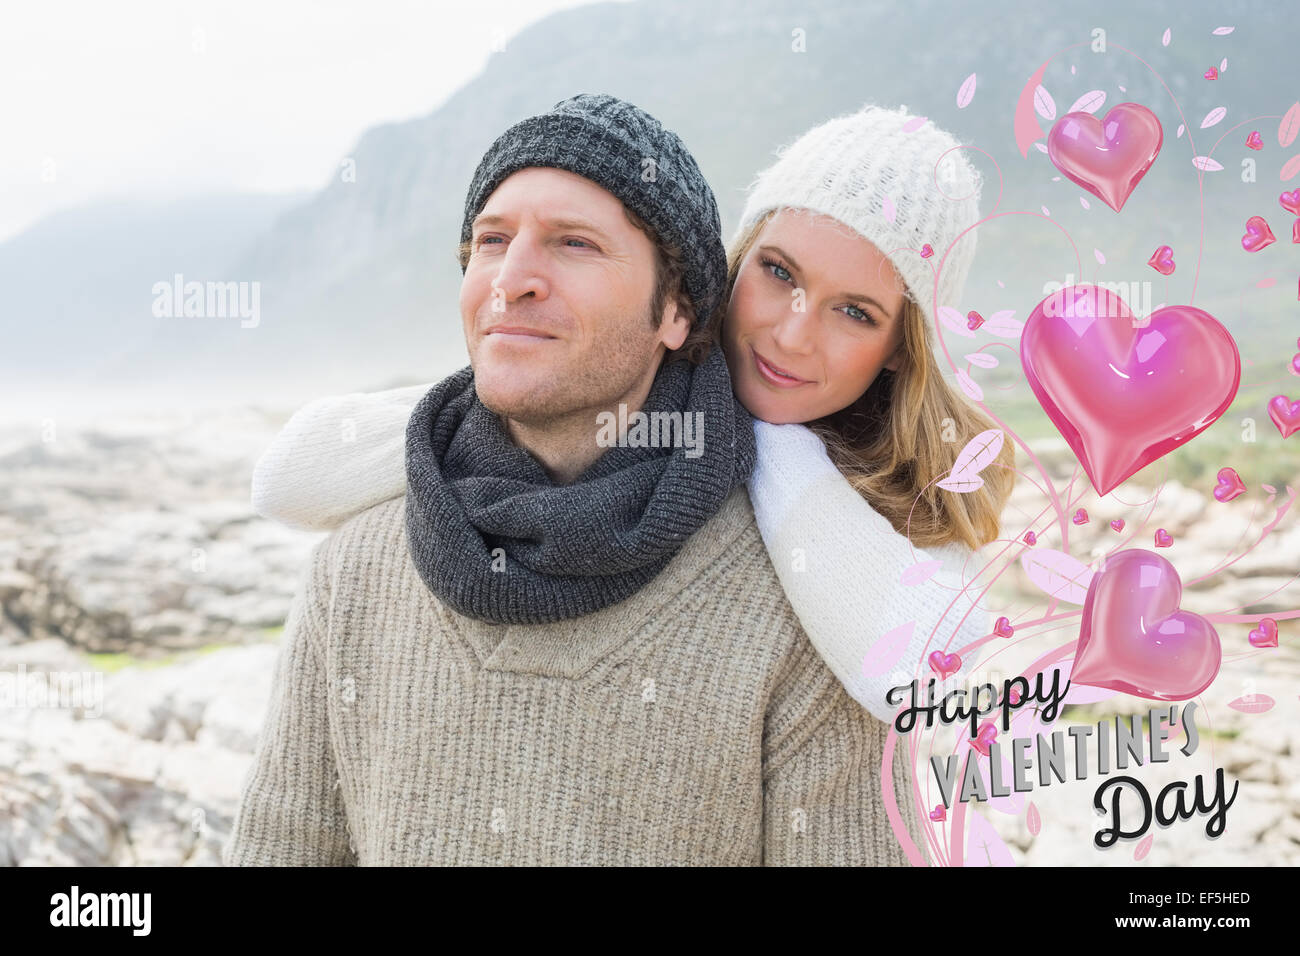 Composite image of romantic young couple together on a rocky landscape Stock Photo